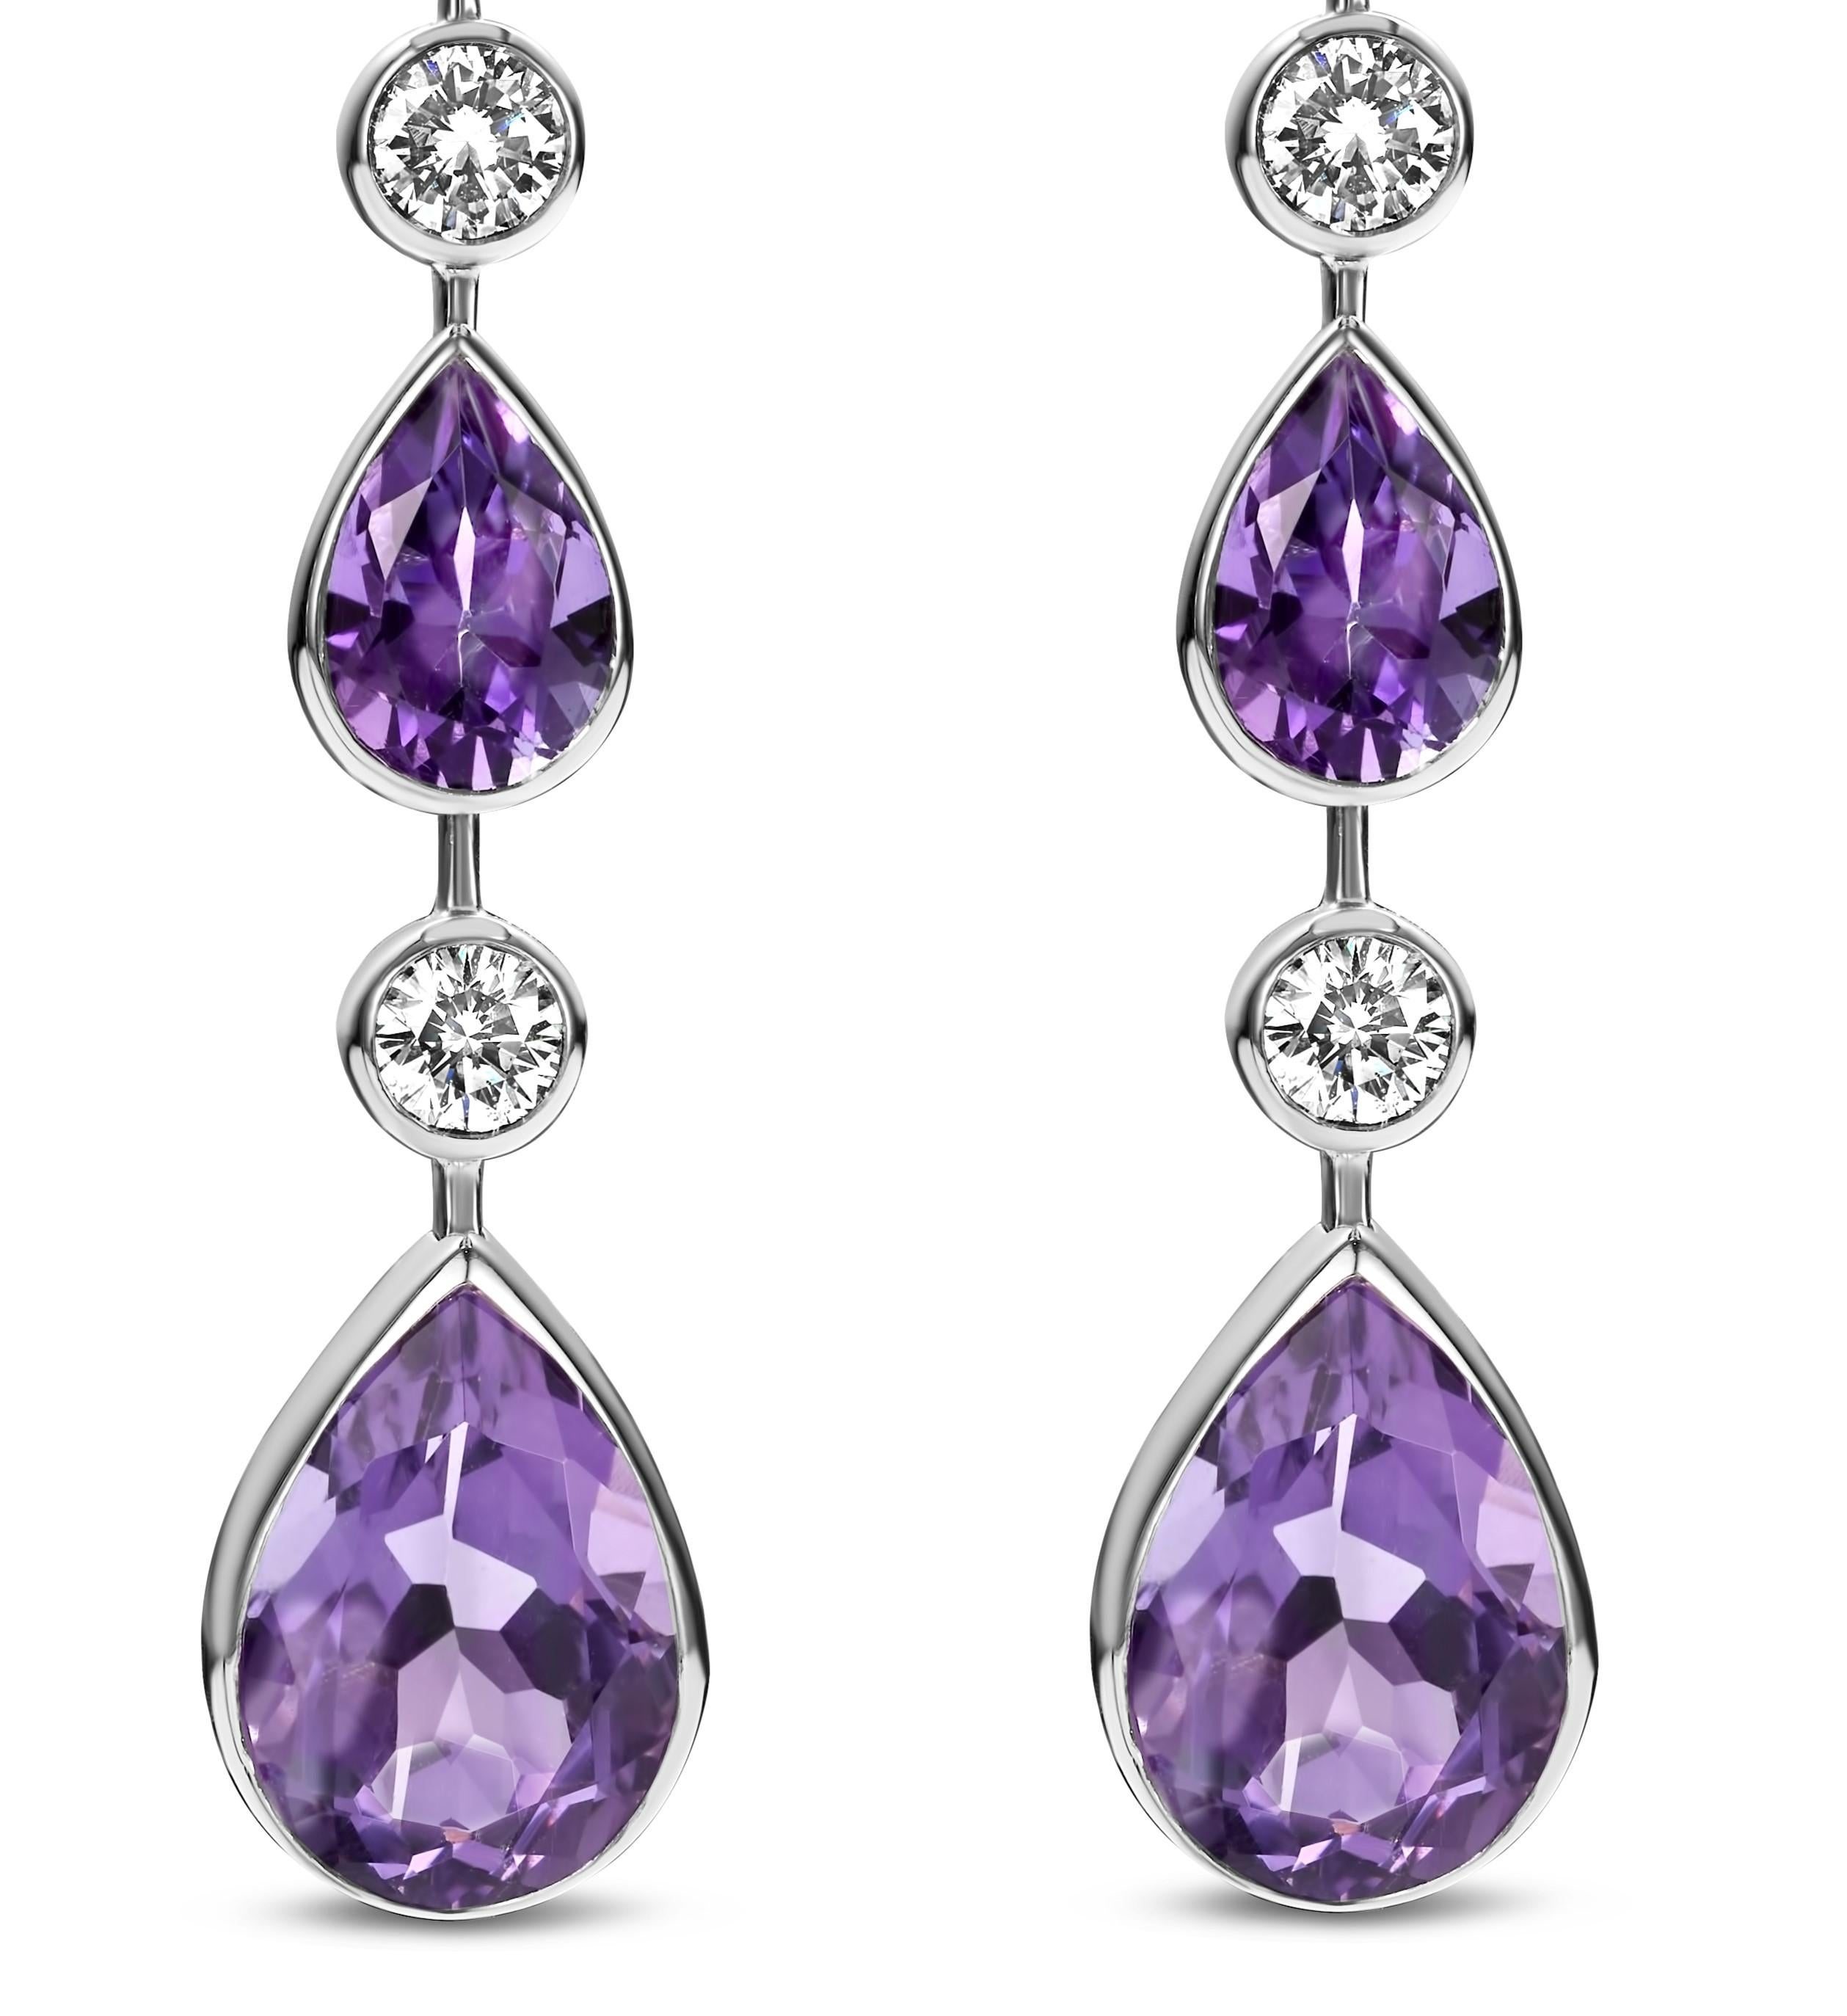 Very Elegant 18 kt. White Gold Earrings with 18.43 ct. Pear Shapes Amethyst & 1.55 ct. Brilliant cut Diamonds 

Completely hand made in our atelier,one of a kind.

Amethyst: Pear Shapes together approx. 18.43 ct.

Diamonds: Brilliant cut diamonds,